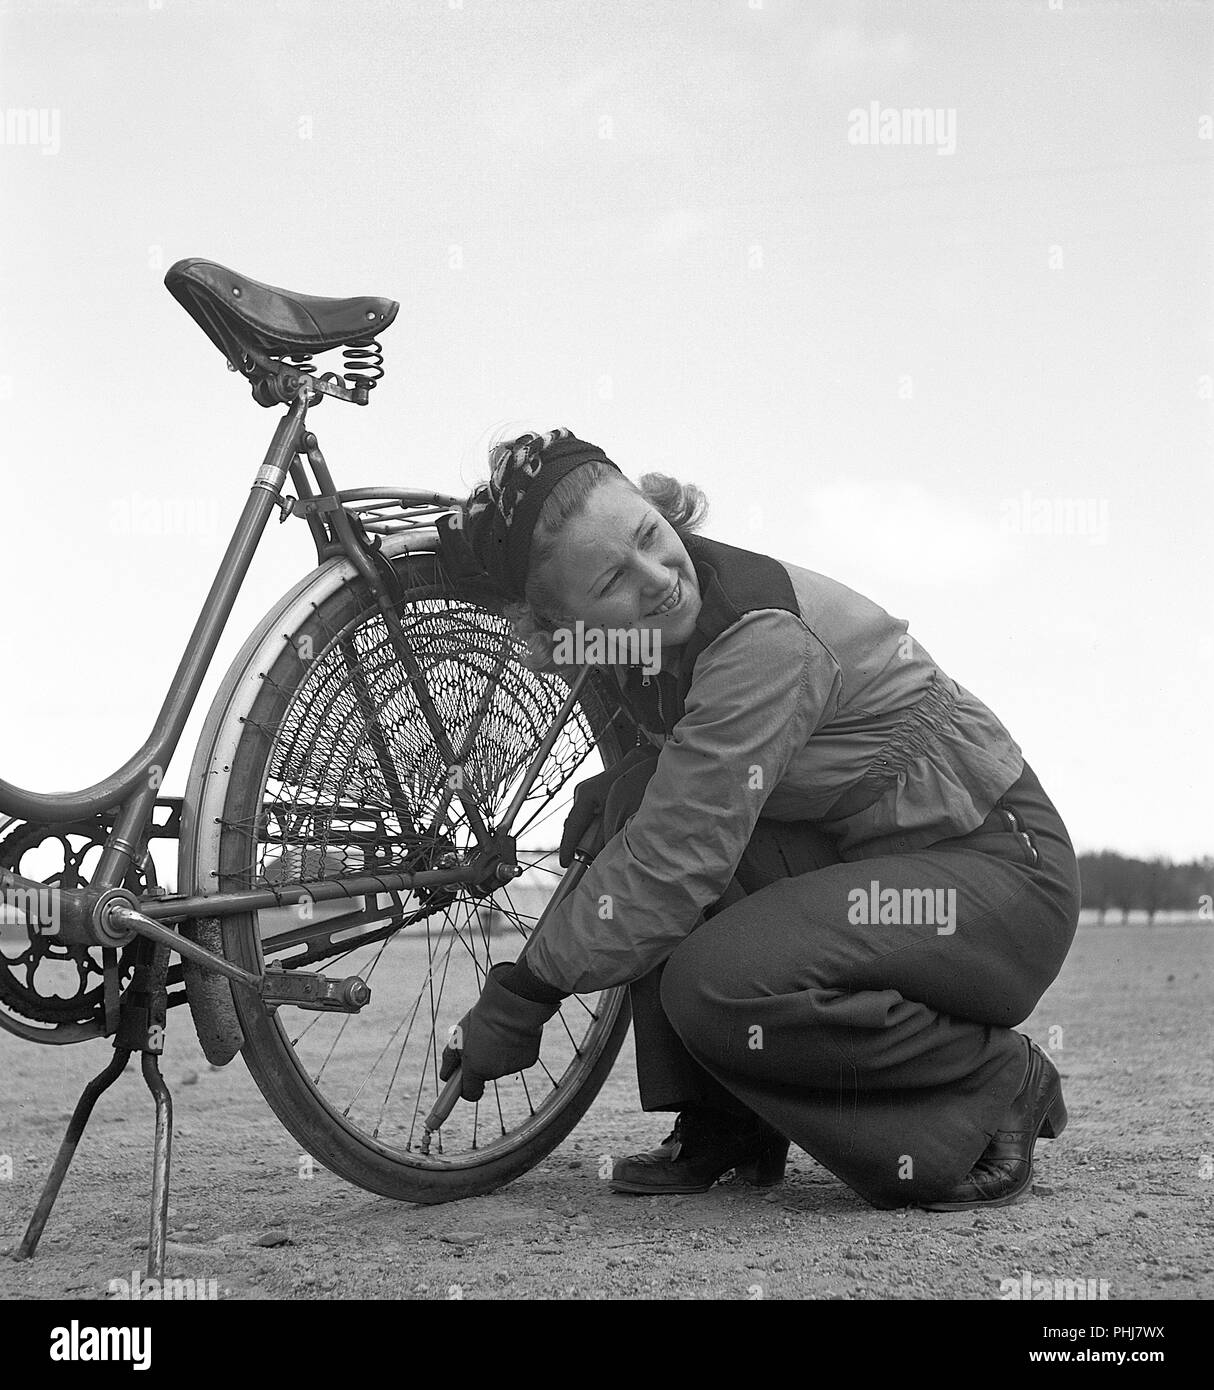 1940s couple with a bicycle. A young woman is pumping air into the back tire of her bicycle. She is wearing the typical sports clothing of the 1940s with long trousers and a short jacket. Notice the protection net mounted over the back wheel to prevent hanging clothes from getting caught in the wheel. Sweden 1942.  Photo KristofferssonA89-1 Stock Photo